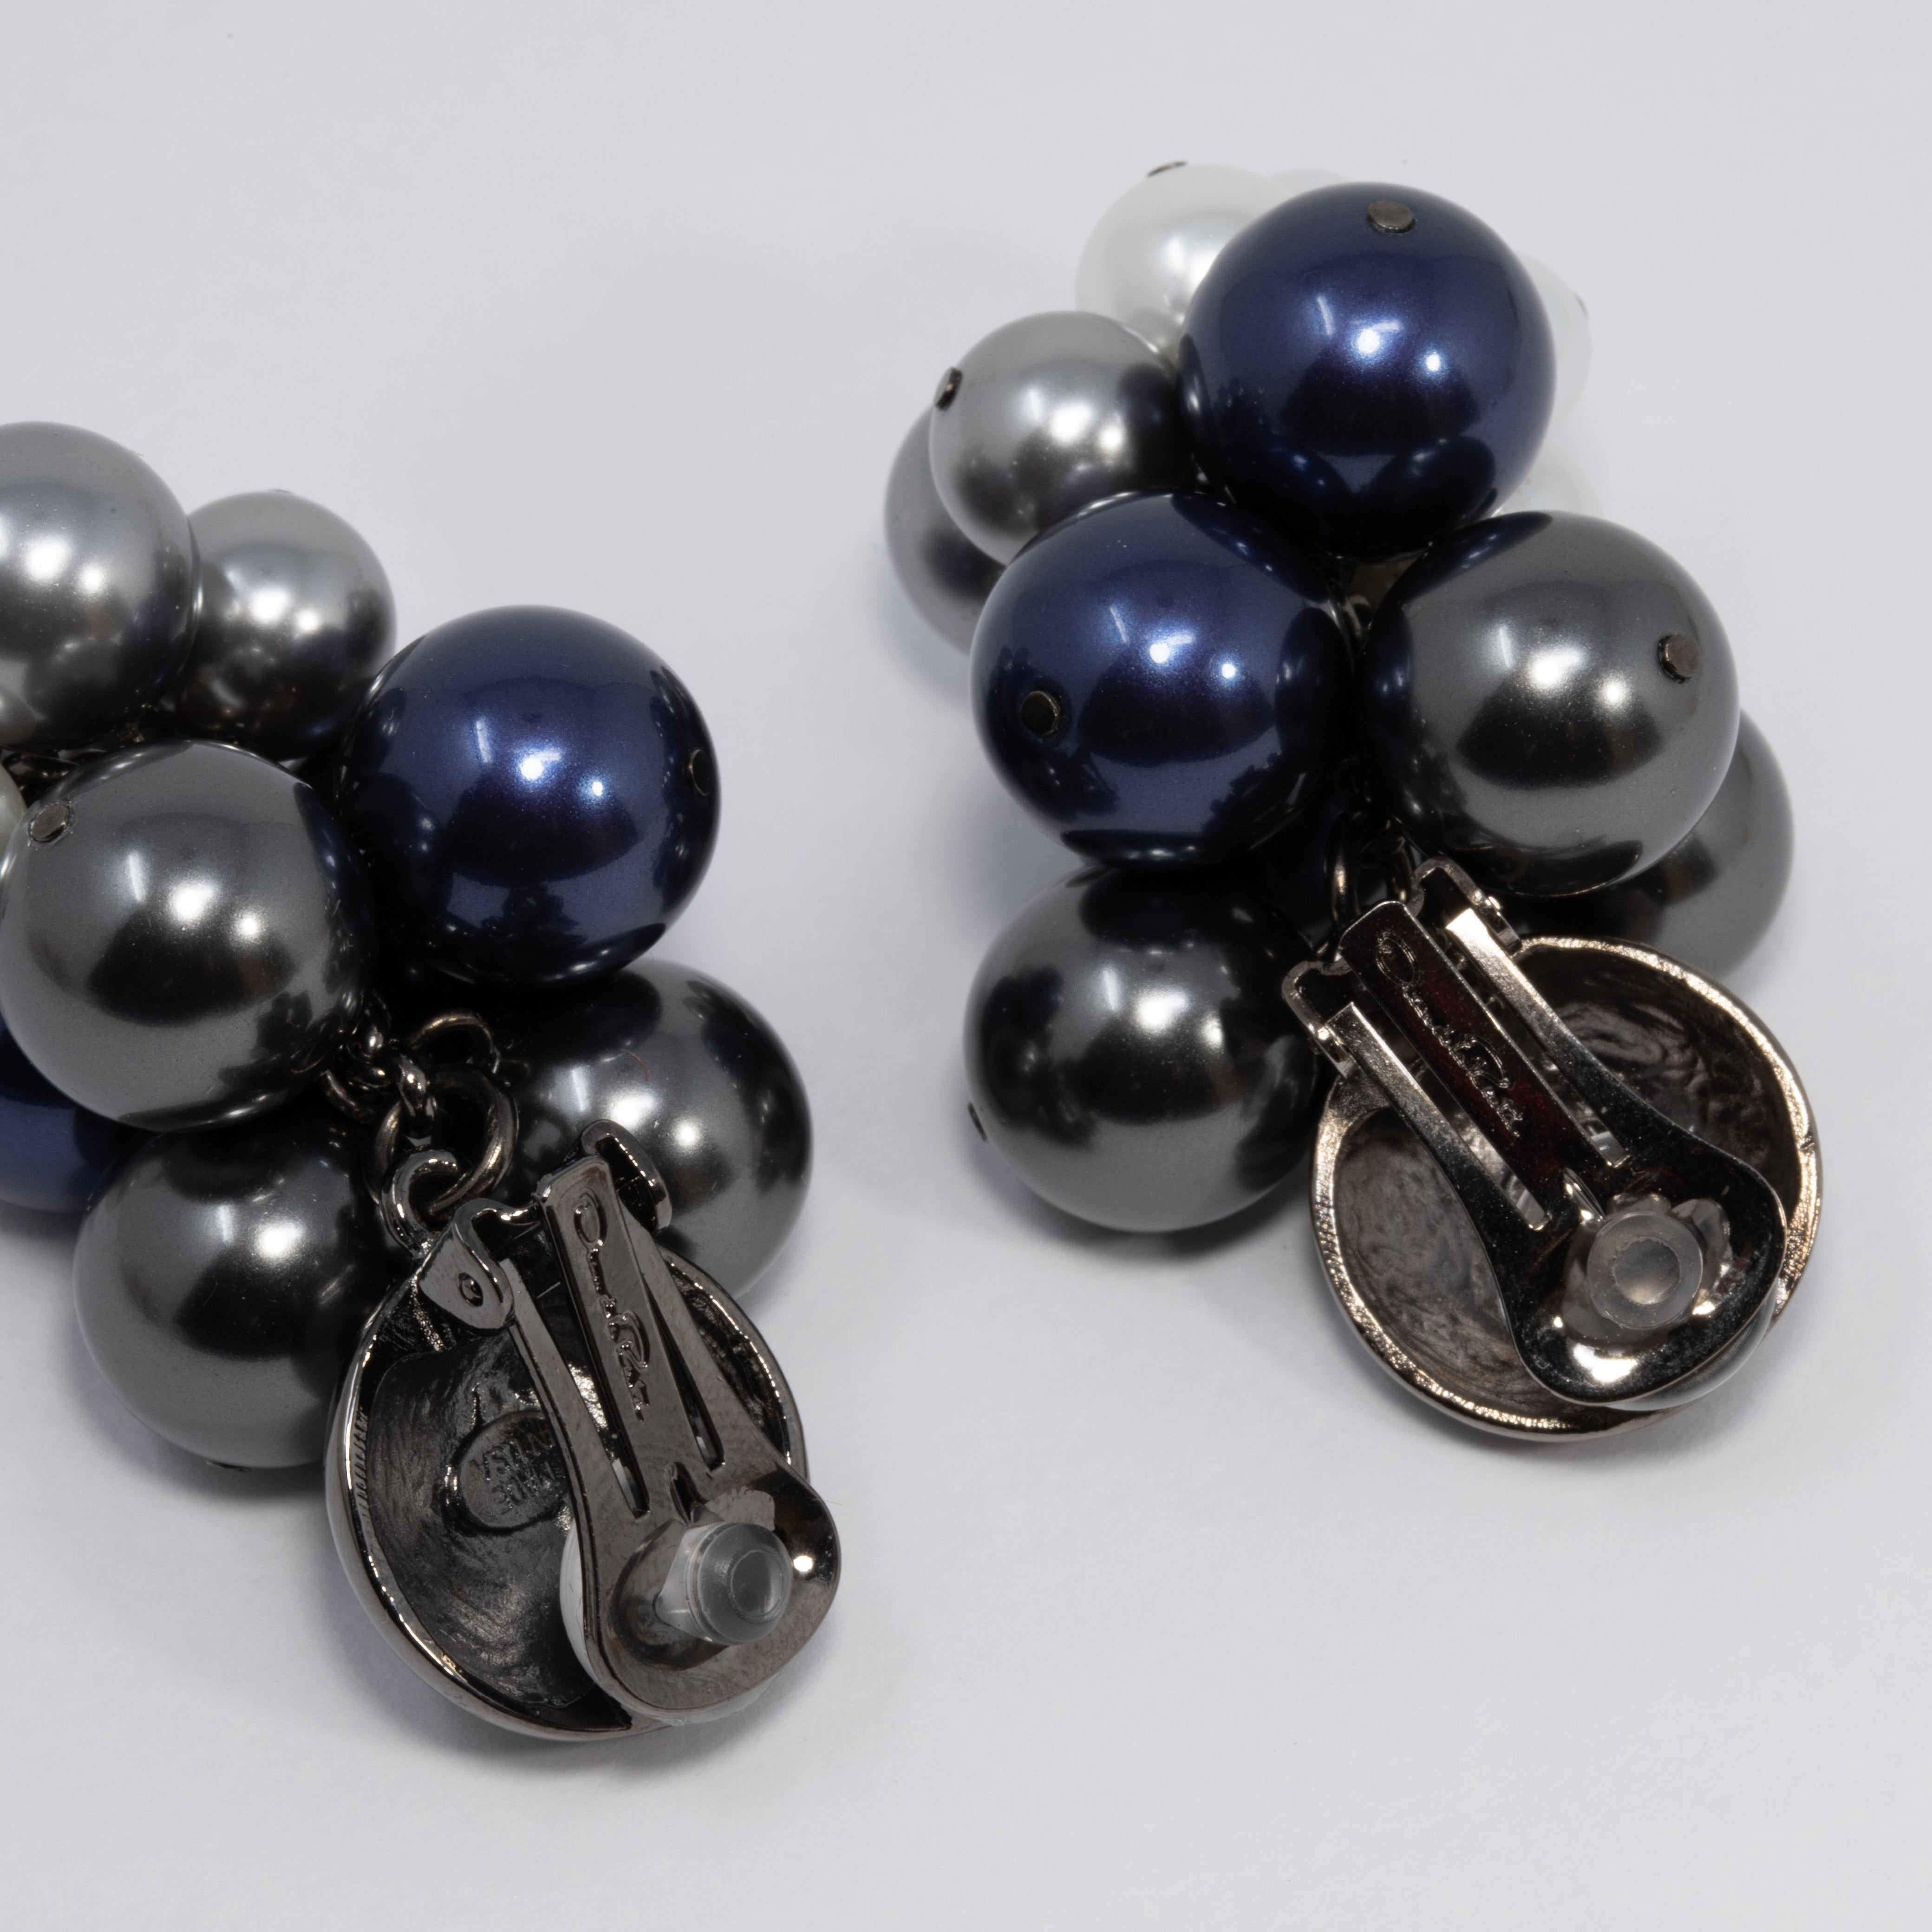 A pair of Oscar de la Renta clip on earrings. Each features a cluster or blue, gray, and white-toned faux pearls of various sizes. Bold and stylish! 

Hallmarks: Oscar de la Renta, Made in USA